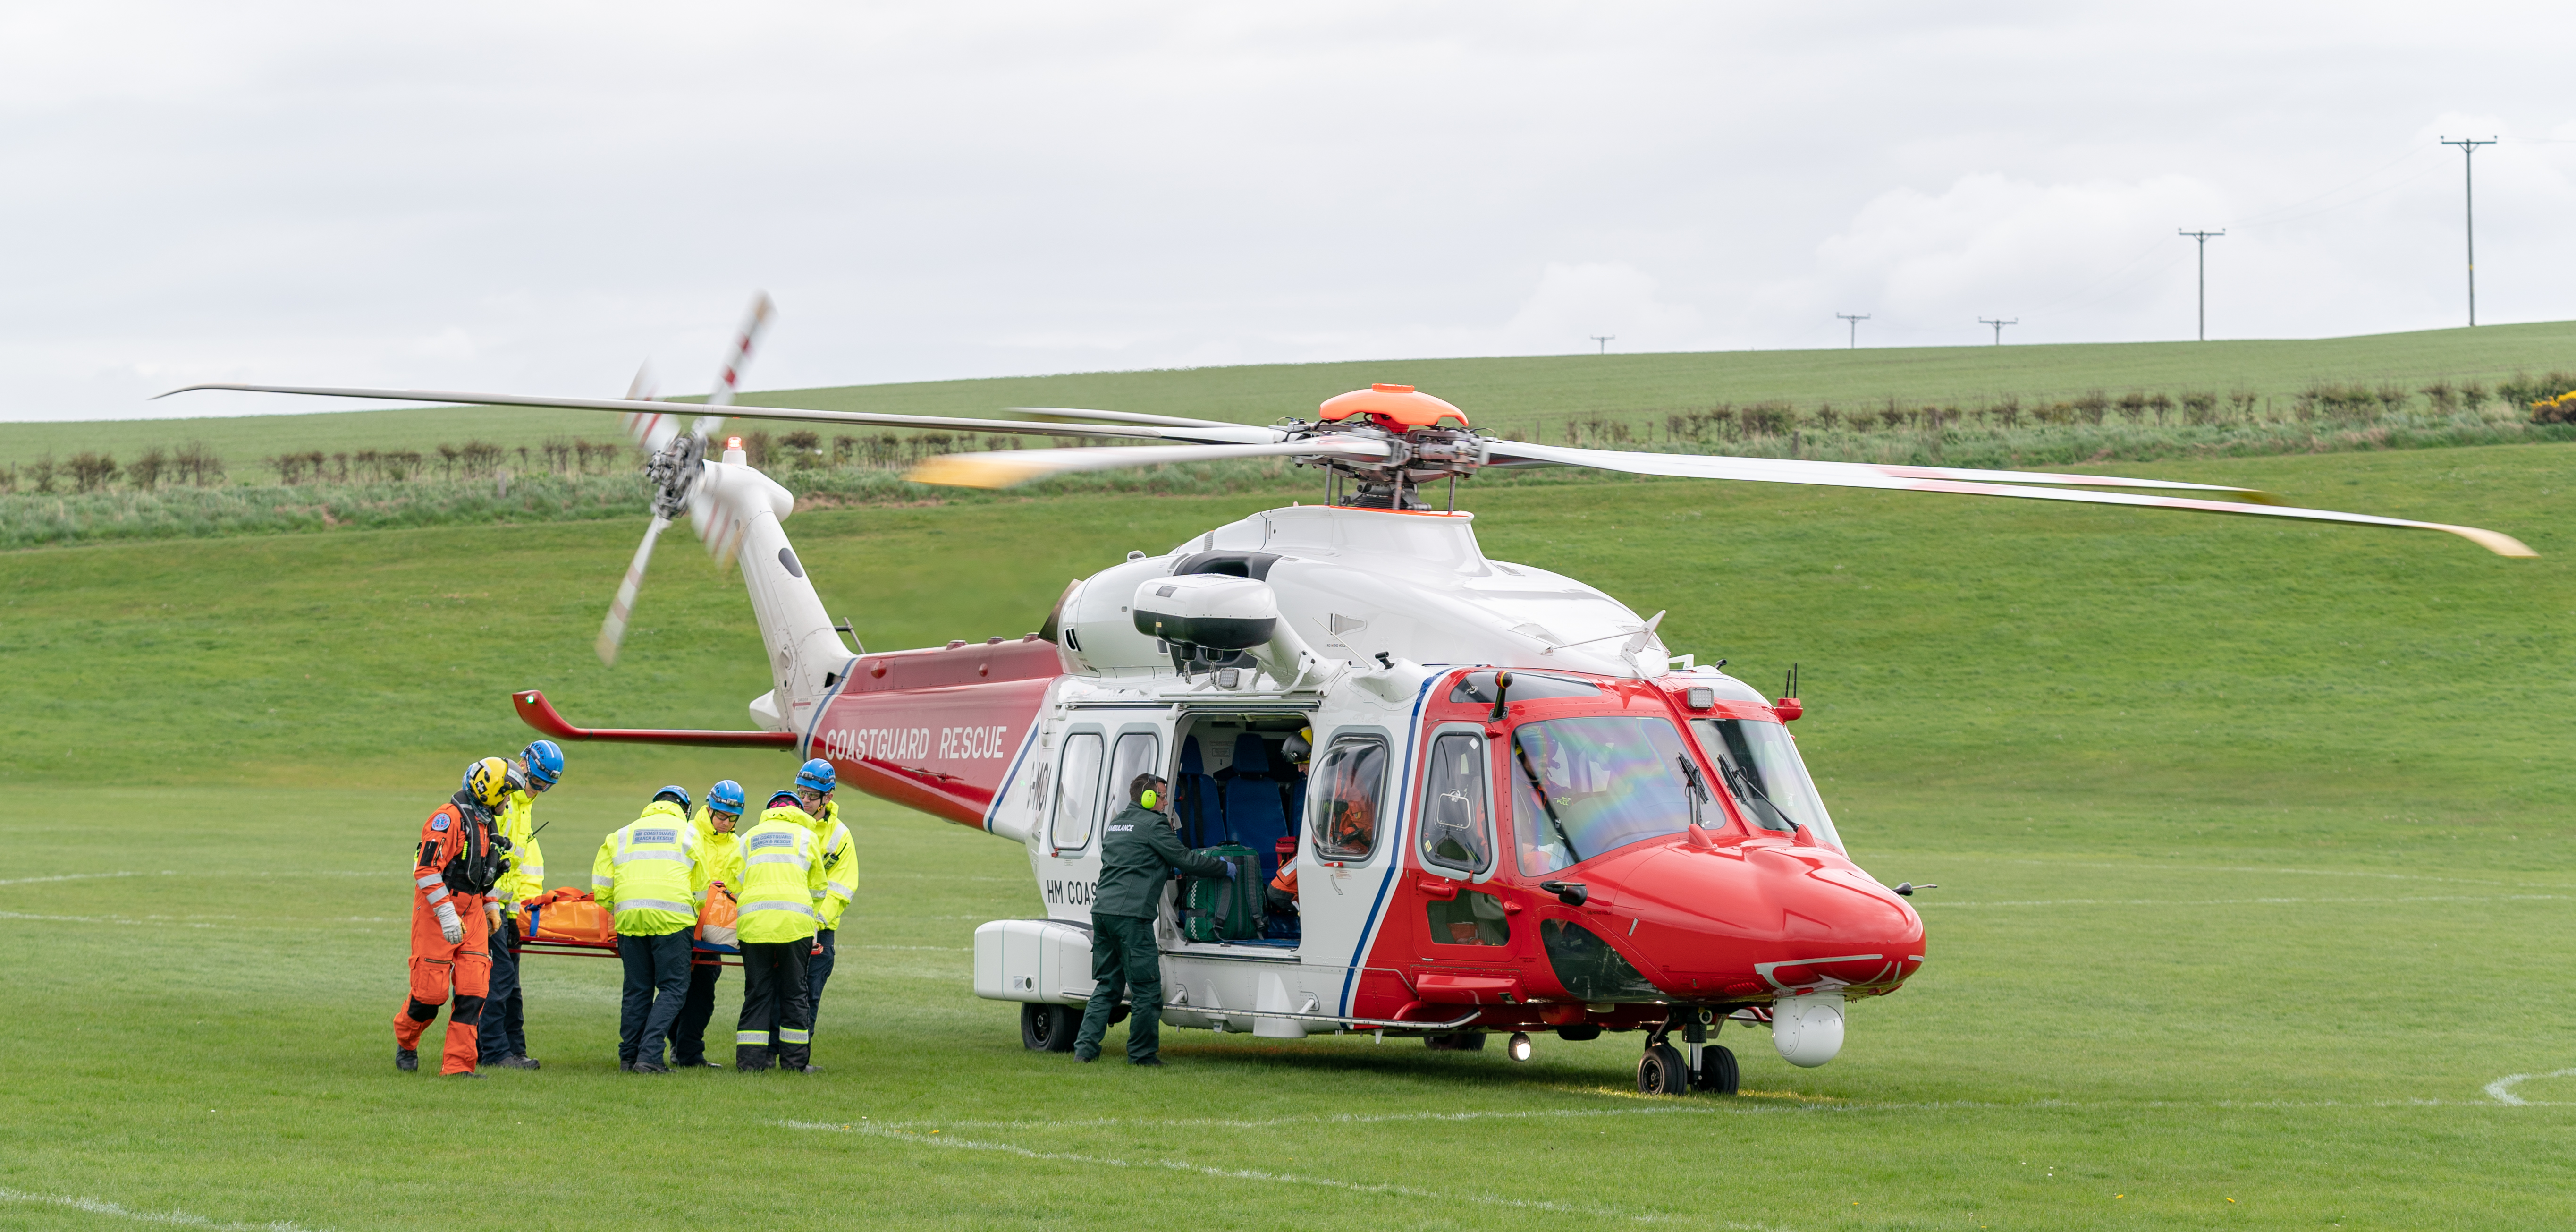 This is from the rescue of a party that fell and injured themselves within the Rotary Club of Buckie, Charity Event, 6 Harbours Walk, Scotland. It is understood that a participant fell and was unable to walk, whereby Coastguard Ground and Helicopter Teams were deployed to manage the casualty. The Casualty would have been placed into the Helicopter in the area of Crannoch Hill, Cullen and taken to Ambulance at Cullen Bay Holiday Park. The party was then taken to Dr Grays Hospital, Elgin. It is not thought that injury is Life Threatening. Photographed by JASPERIMAGE © - PICTURE CONTENT: - The Patients is removed from Rescue 151 from Inverness by Coastguard Teams from Buckie and conveyed on stretcher to aawaitin Ambulance